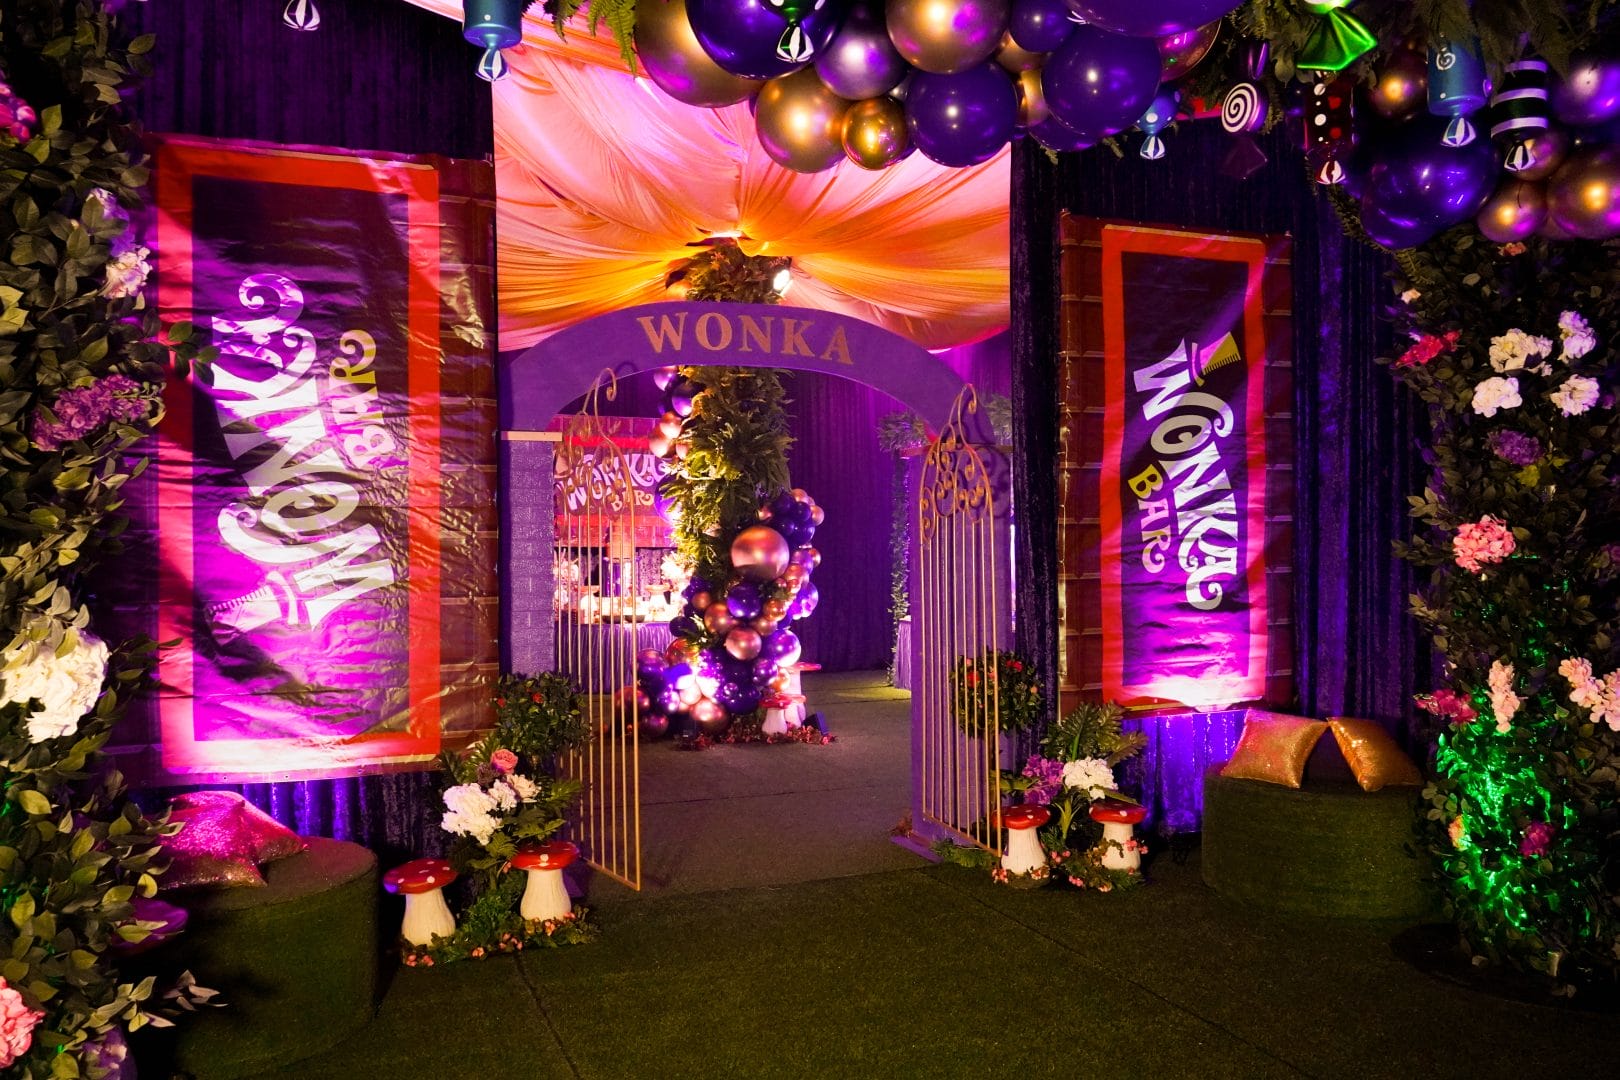 Wonka candyland themed entrance to the dance floor area featuring balloons, themed banners, lots of greenery, and flowers